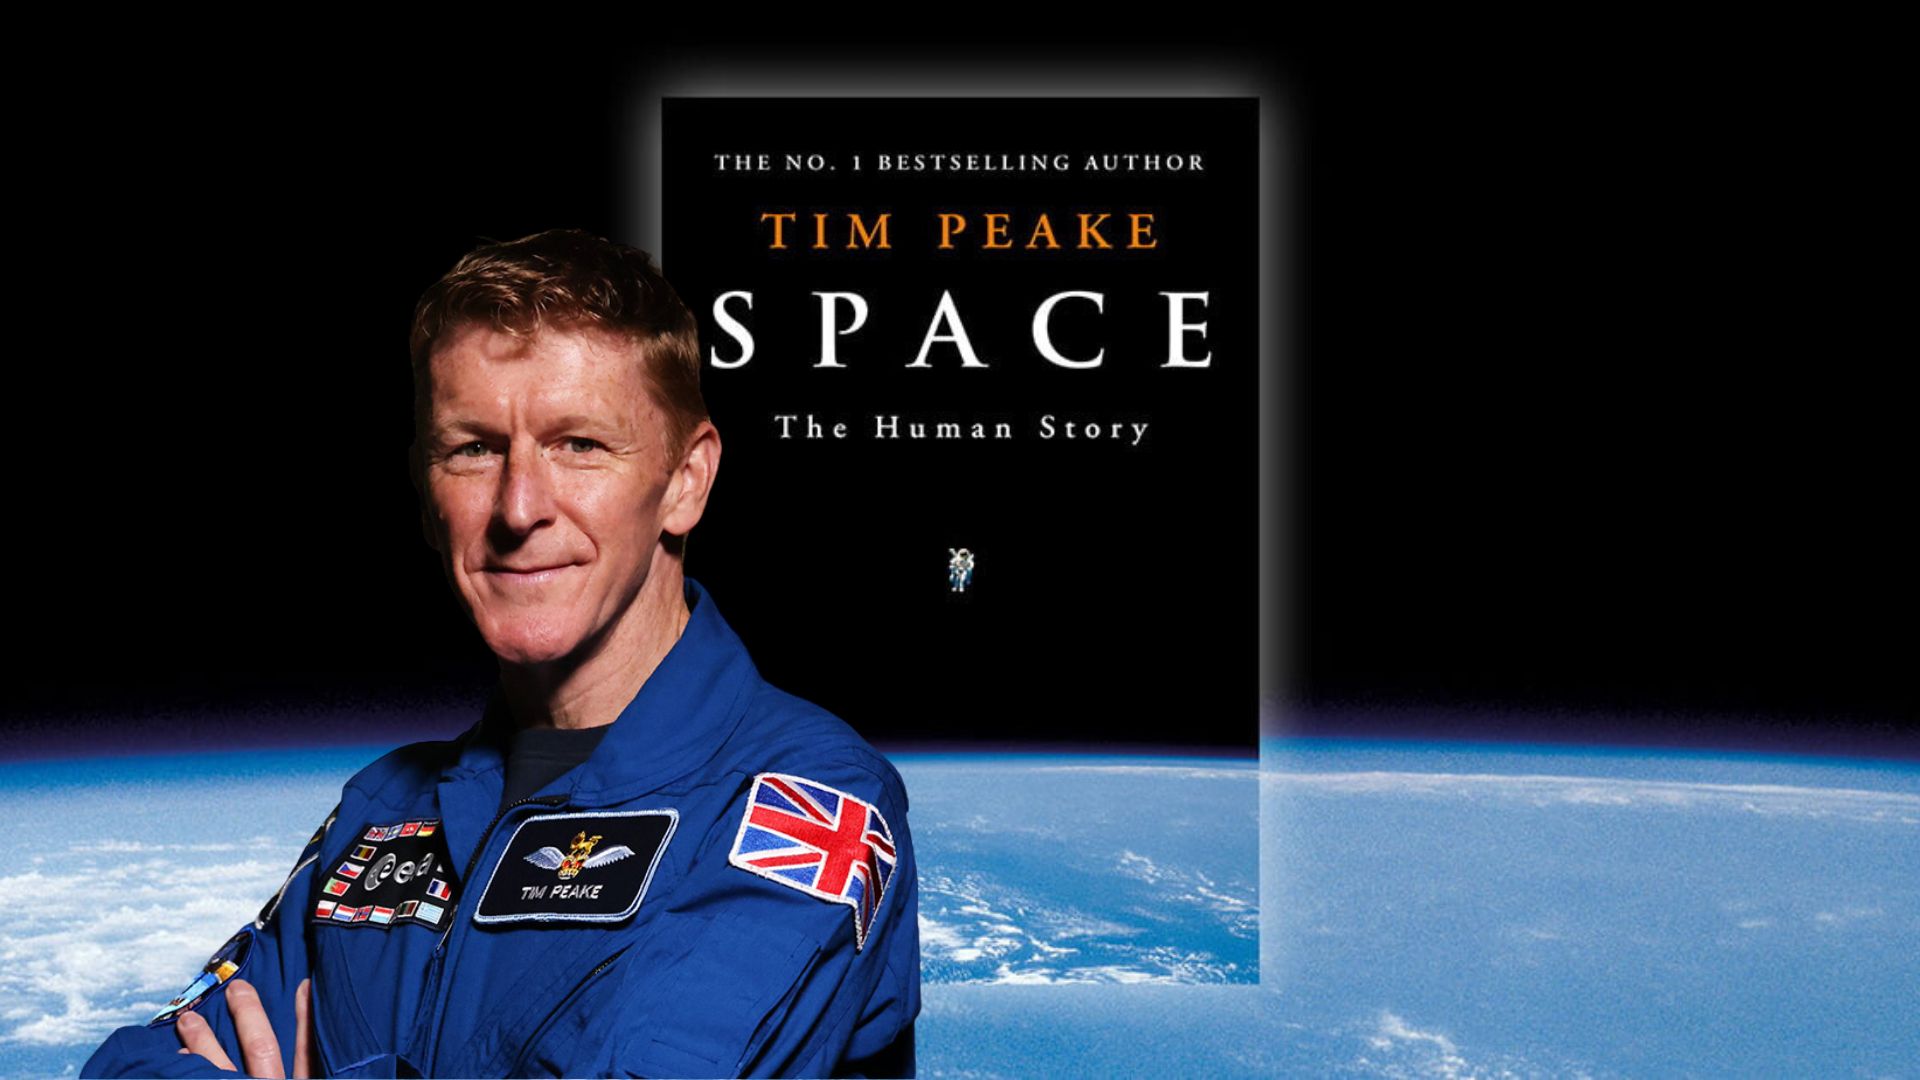 Tim Peake “Space: the Human Story” – a journey into the lives that shaped astronautics